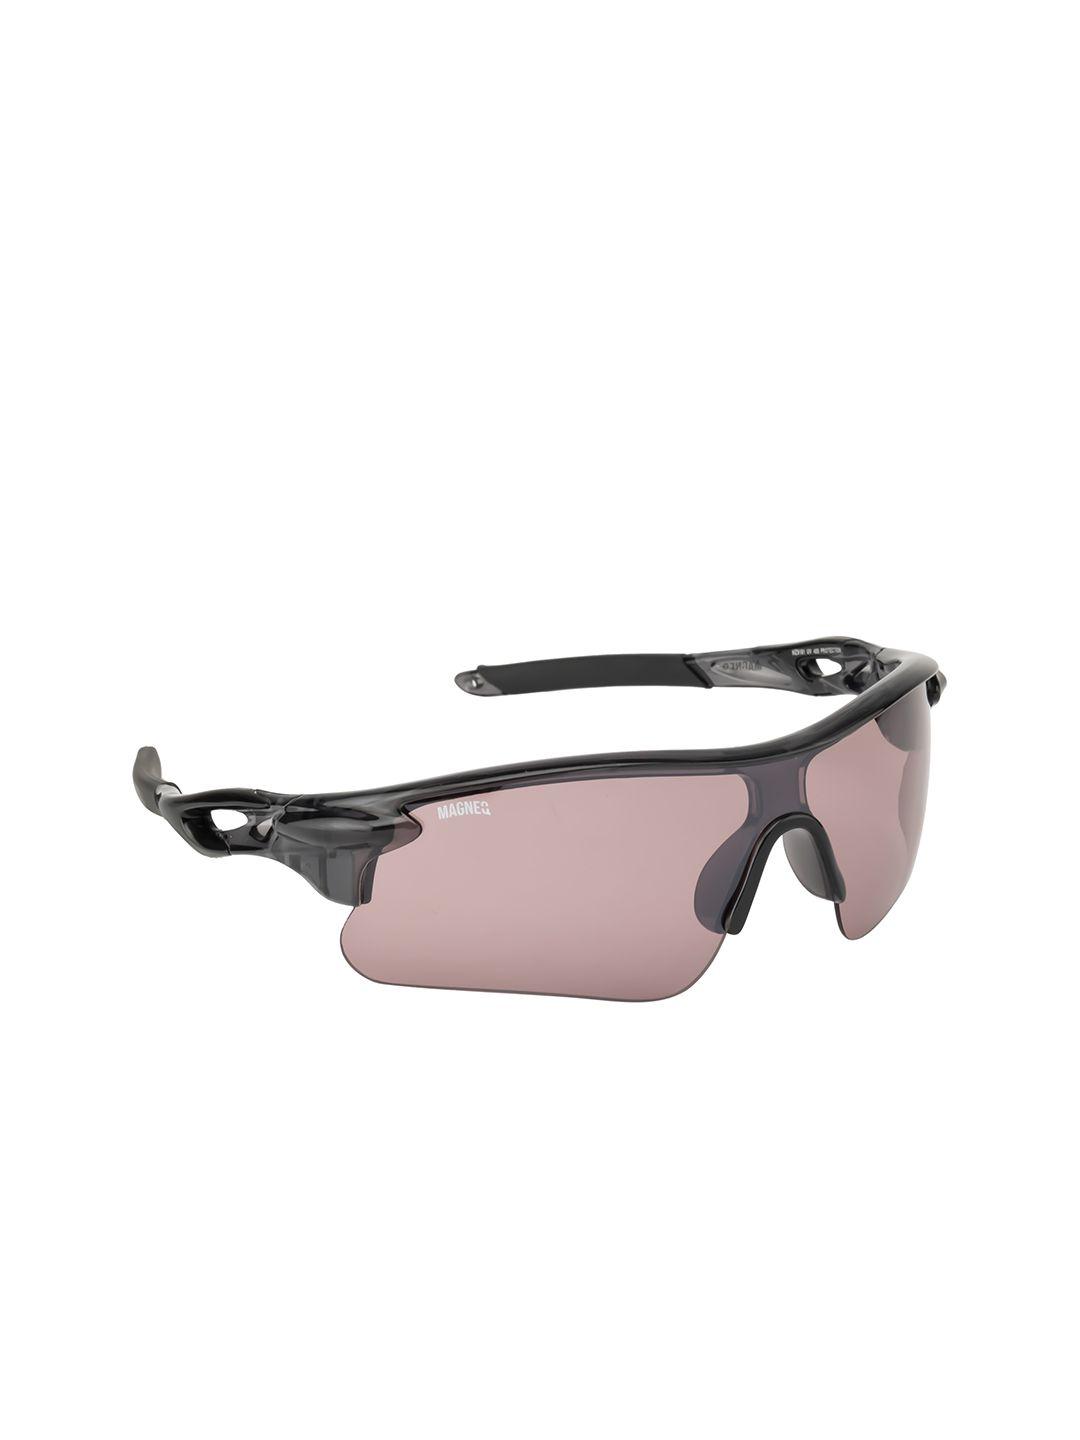 magneq lens & shield sunglasses with polarised & uv protected lens mg 9181/s c3 hz 7020